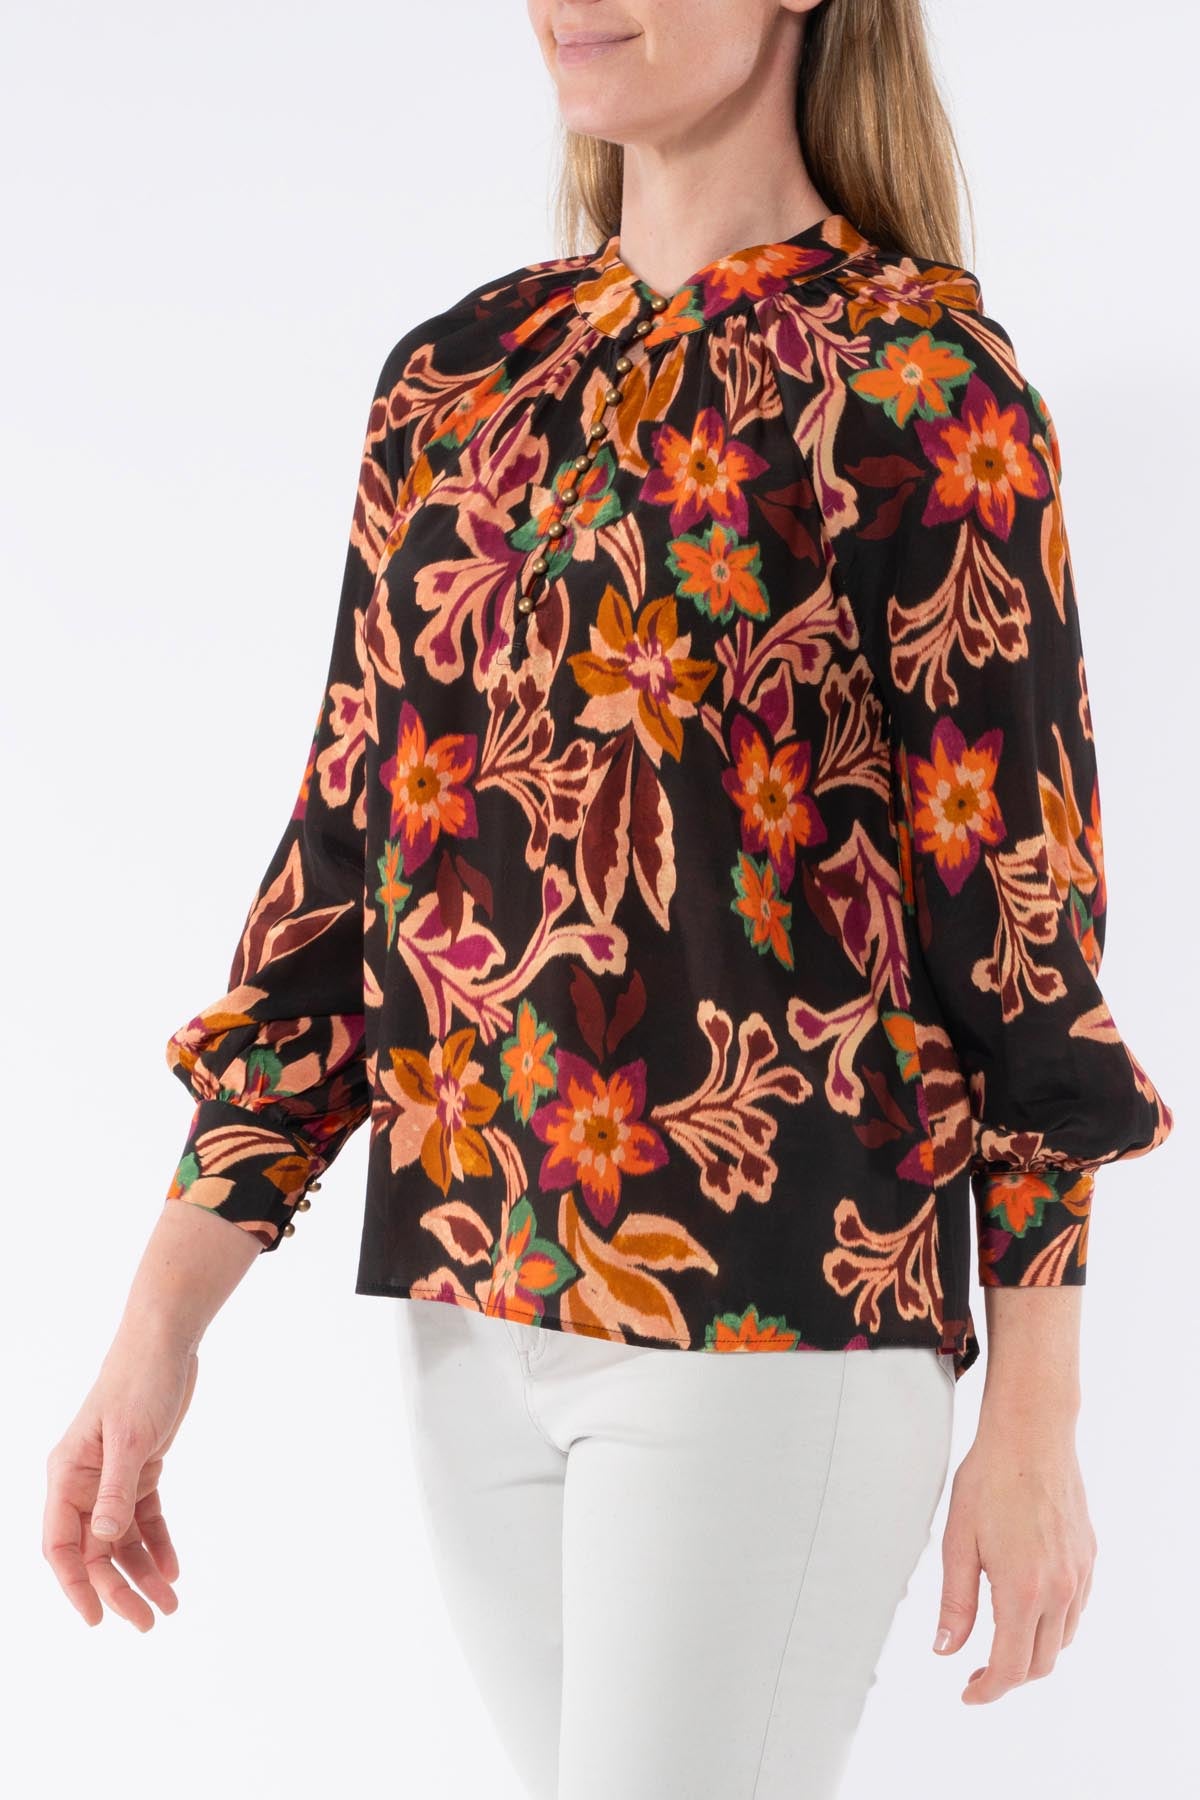 Spice Floral Top